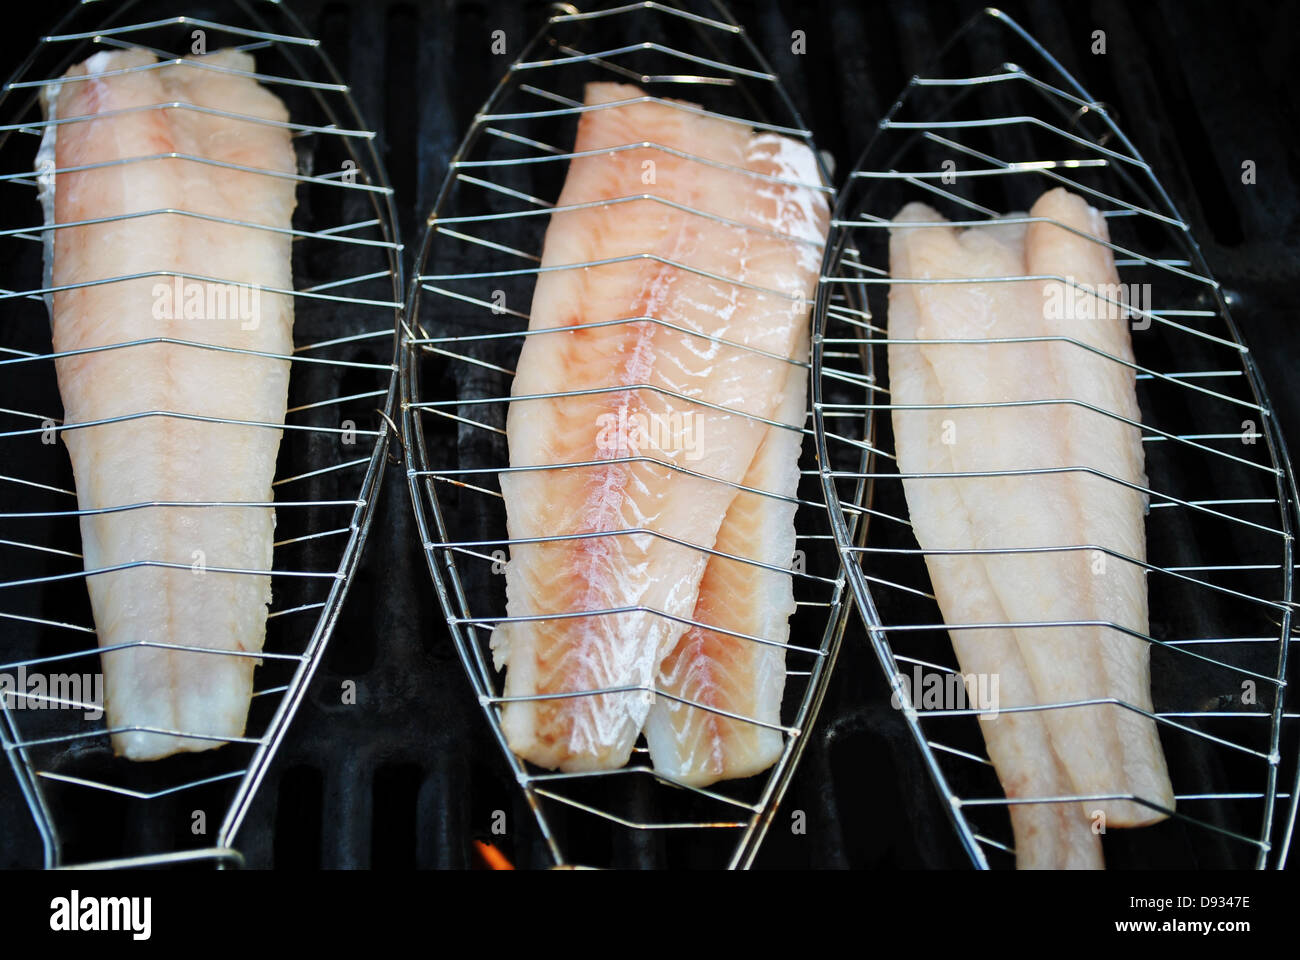 Grilling Healthy White Fish for Dinner Stock Photo